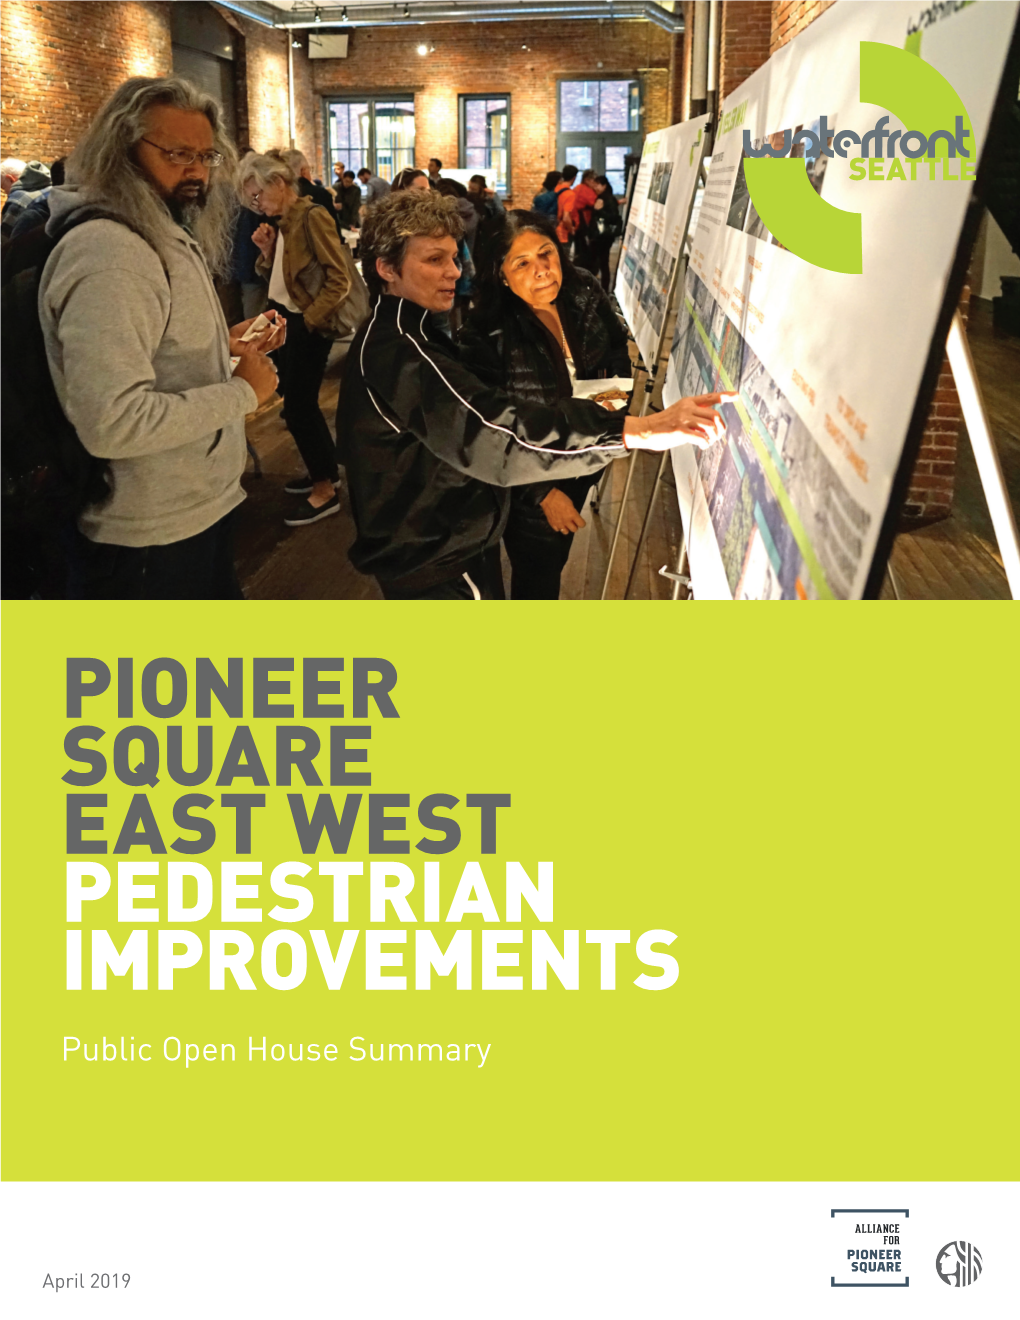 PIONEER SQUARE EAST WEST PEDESTRIAN IMPROVEMENTS Public Open House Summary